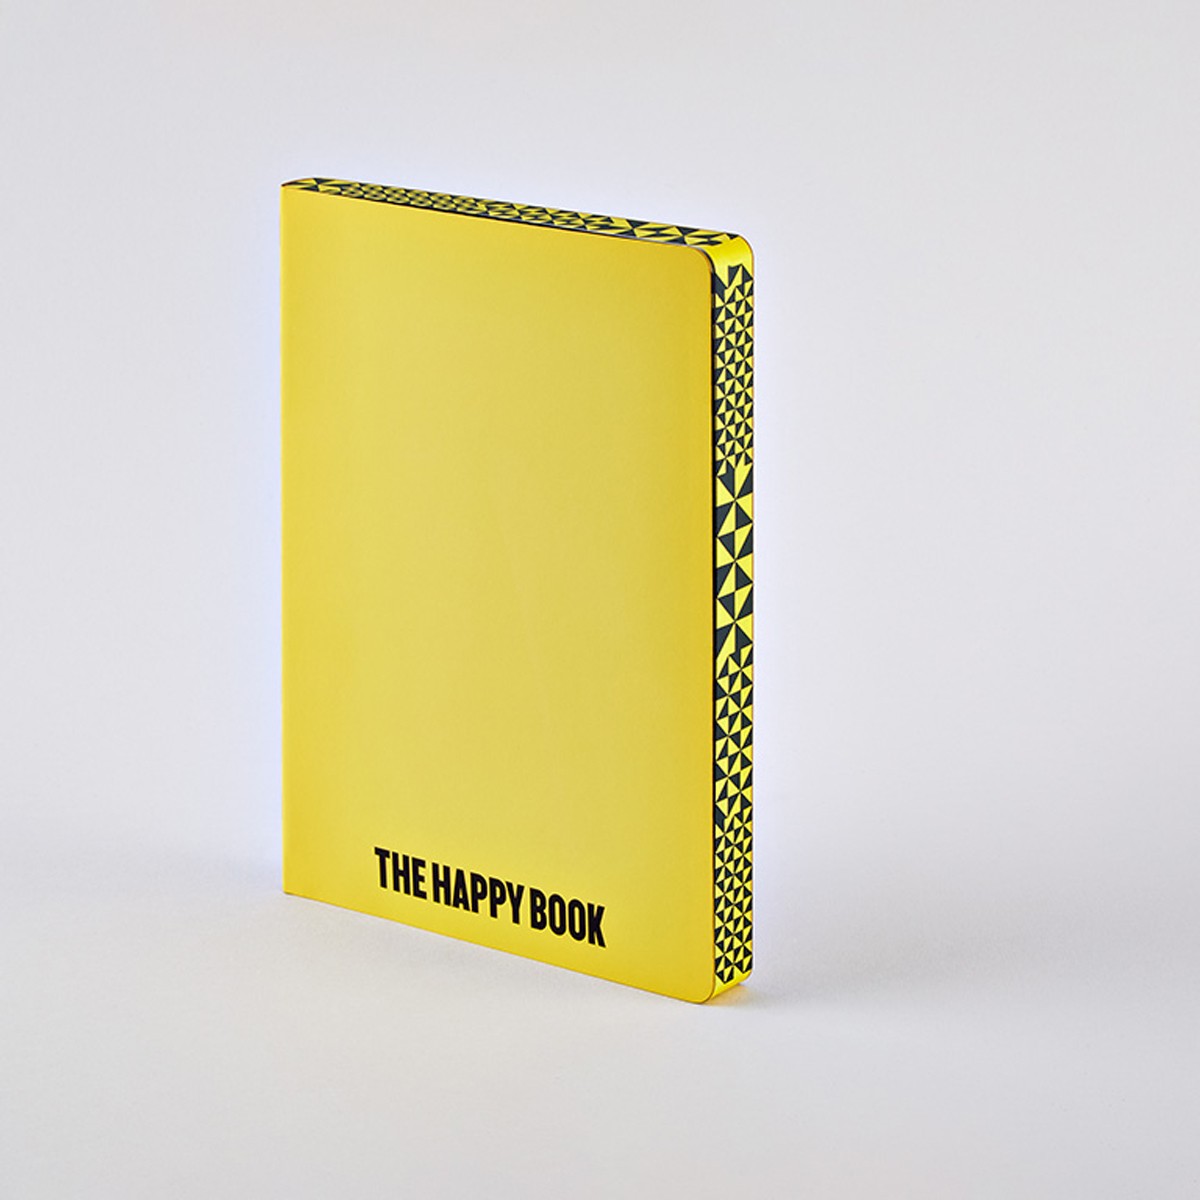 Nuuna Notebook Graphic L - THE HAPPY BOOK BY STEFAN SAGMEISTER